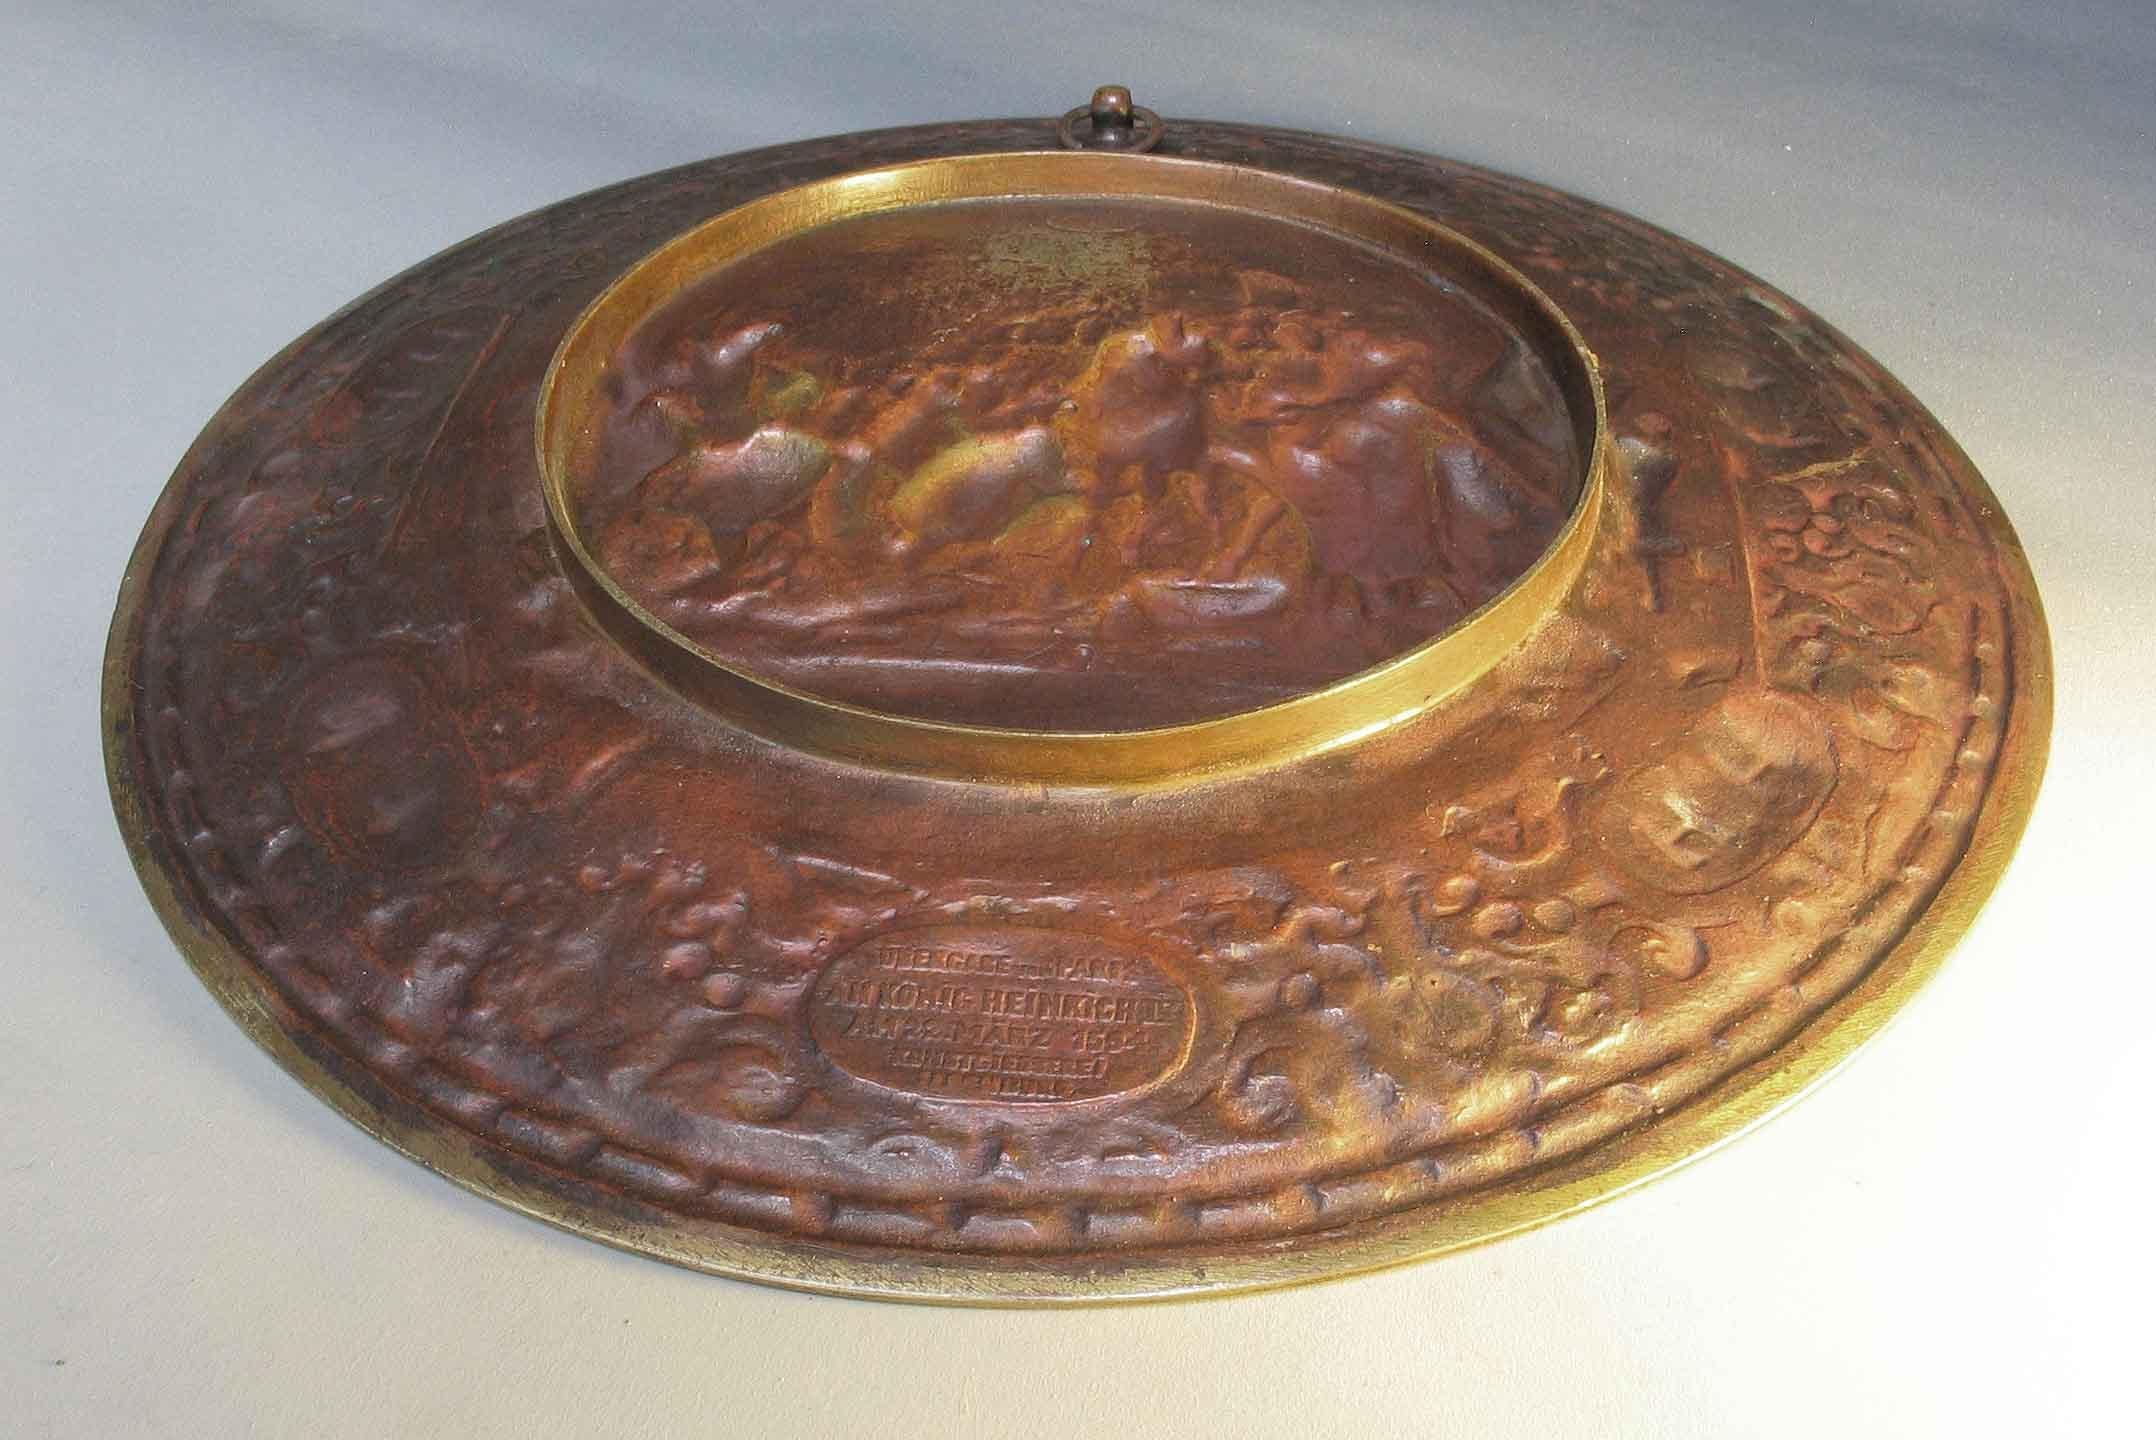 19th Century German Bronze Historicism Charger Depicting Entry of Henry IV into Paris in 1594 For Sale